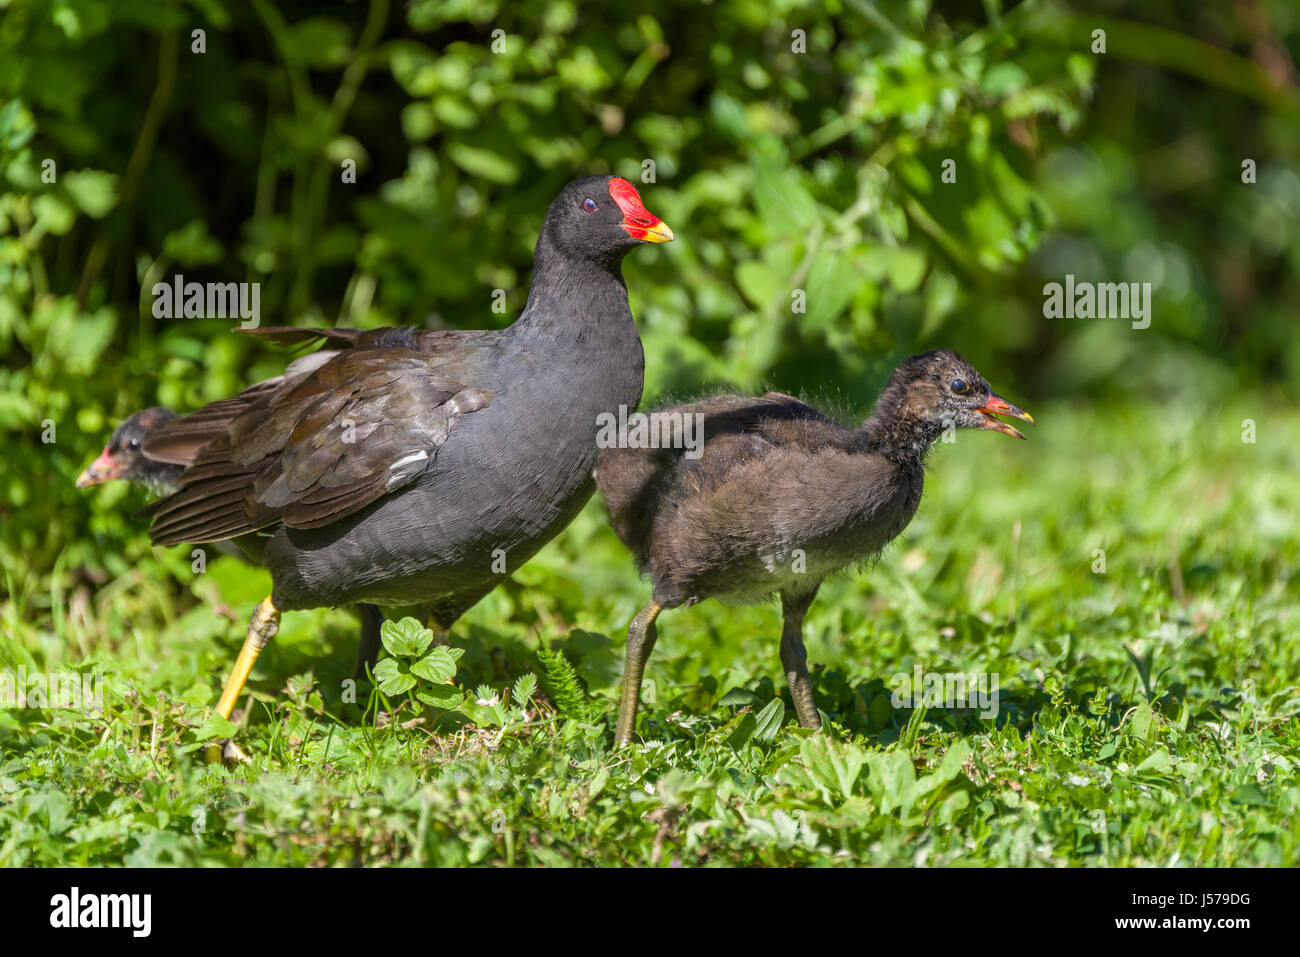 A mother Moorhen keeps watch over  her chicks as they start to forage for food. Stock Photo